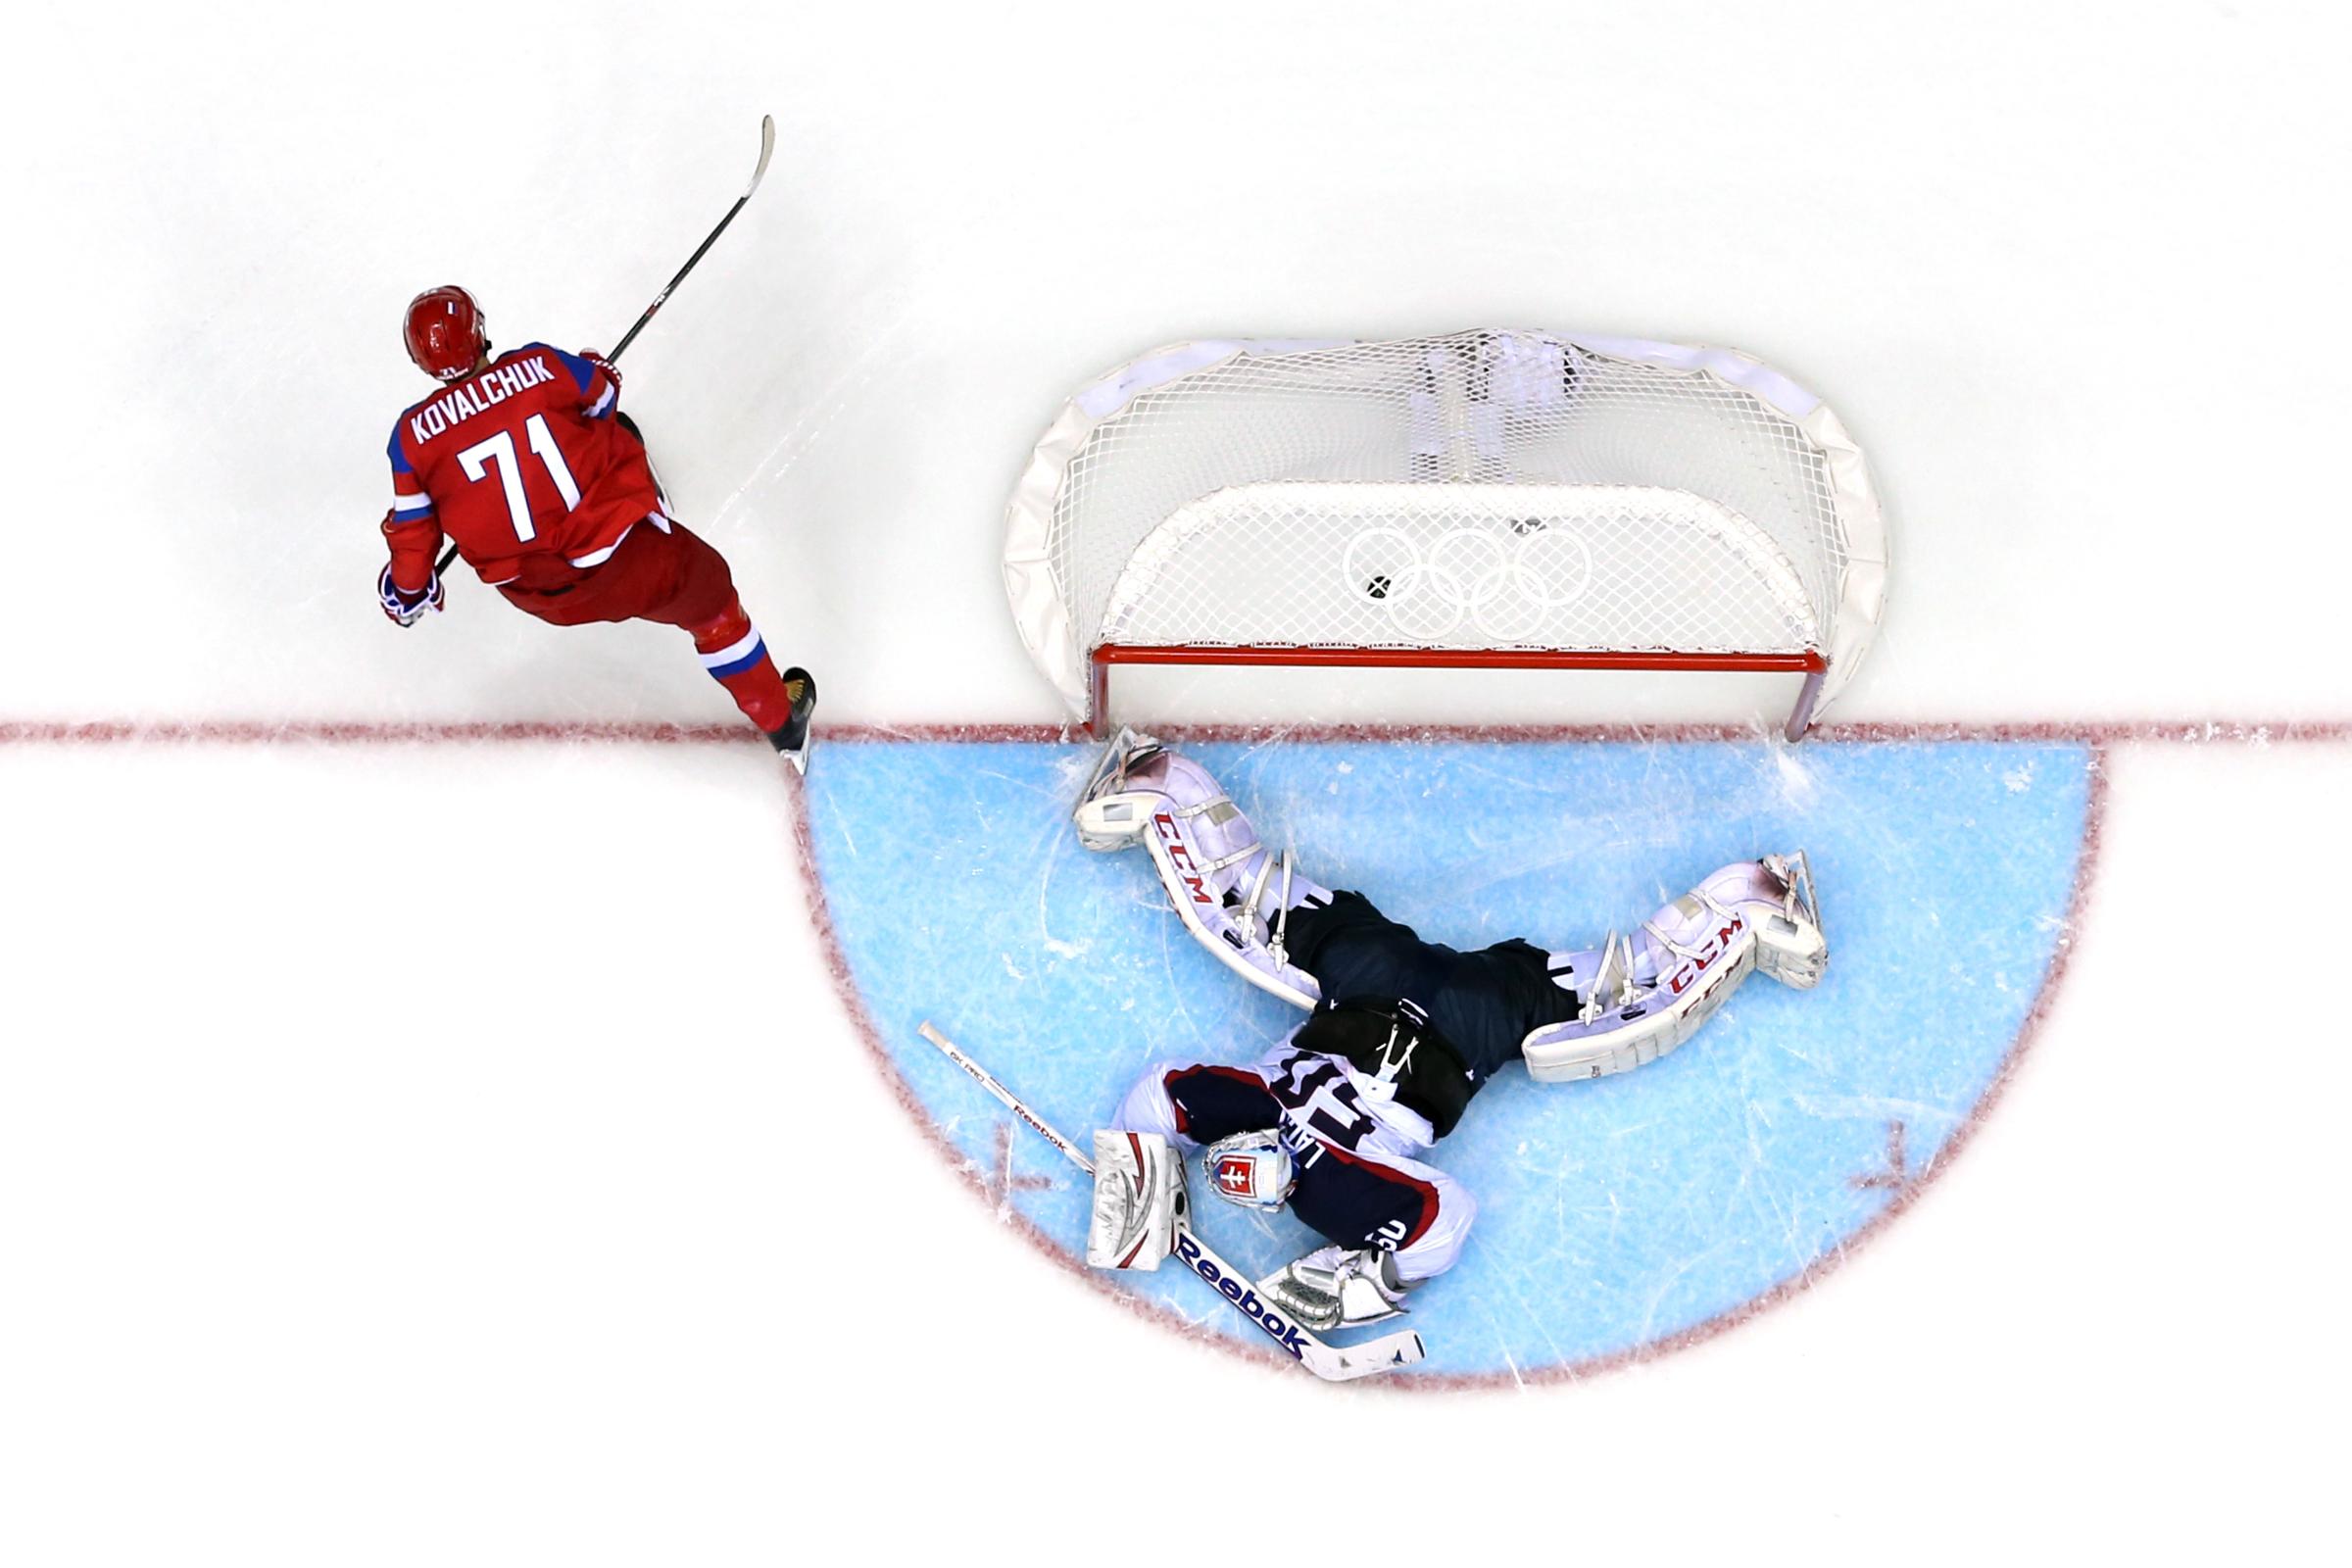 Ilya Kovalchuk #71 of Russia scores a winning goal in a shoot against Jan Laco #50 of Slovakia during the Men's Ice Hockey Preliminary Round Group A game during the Sochi 2014 Winter Olympics at Bolshoy Ice Dome on February 16, 2014 in Sochi, Russia.